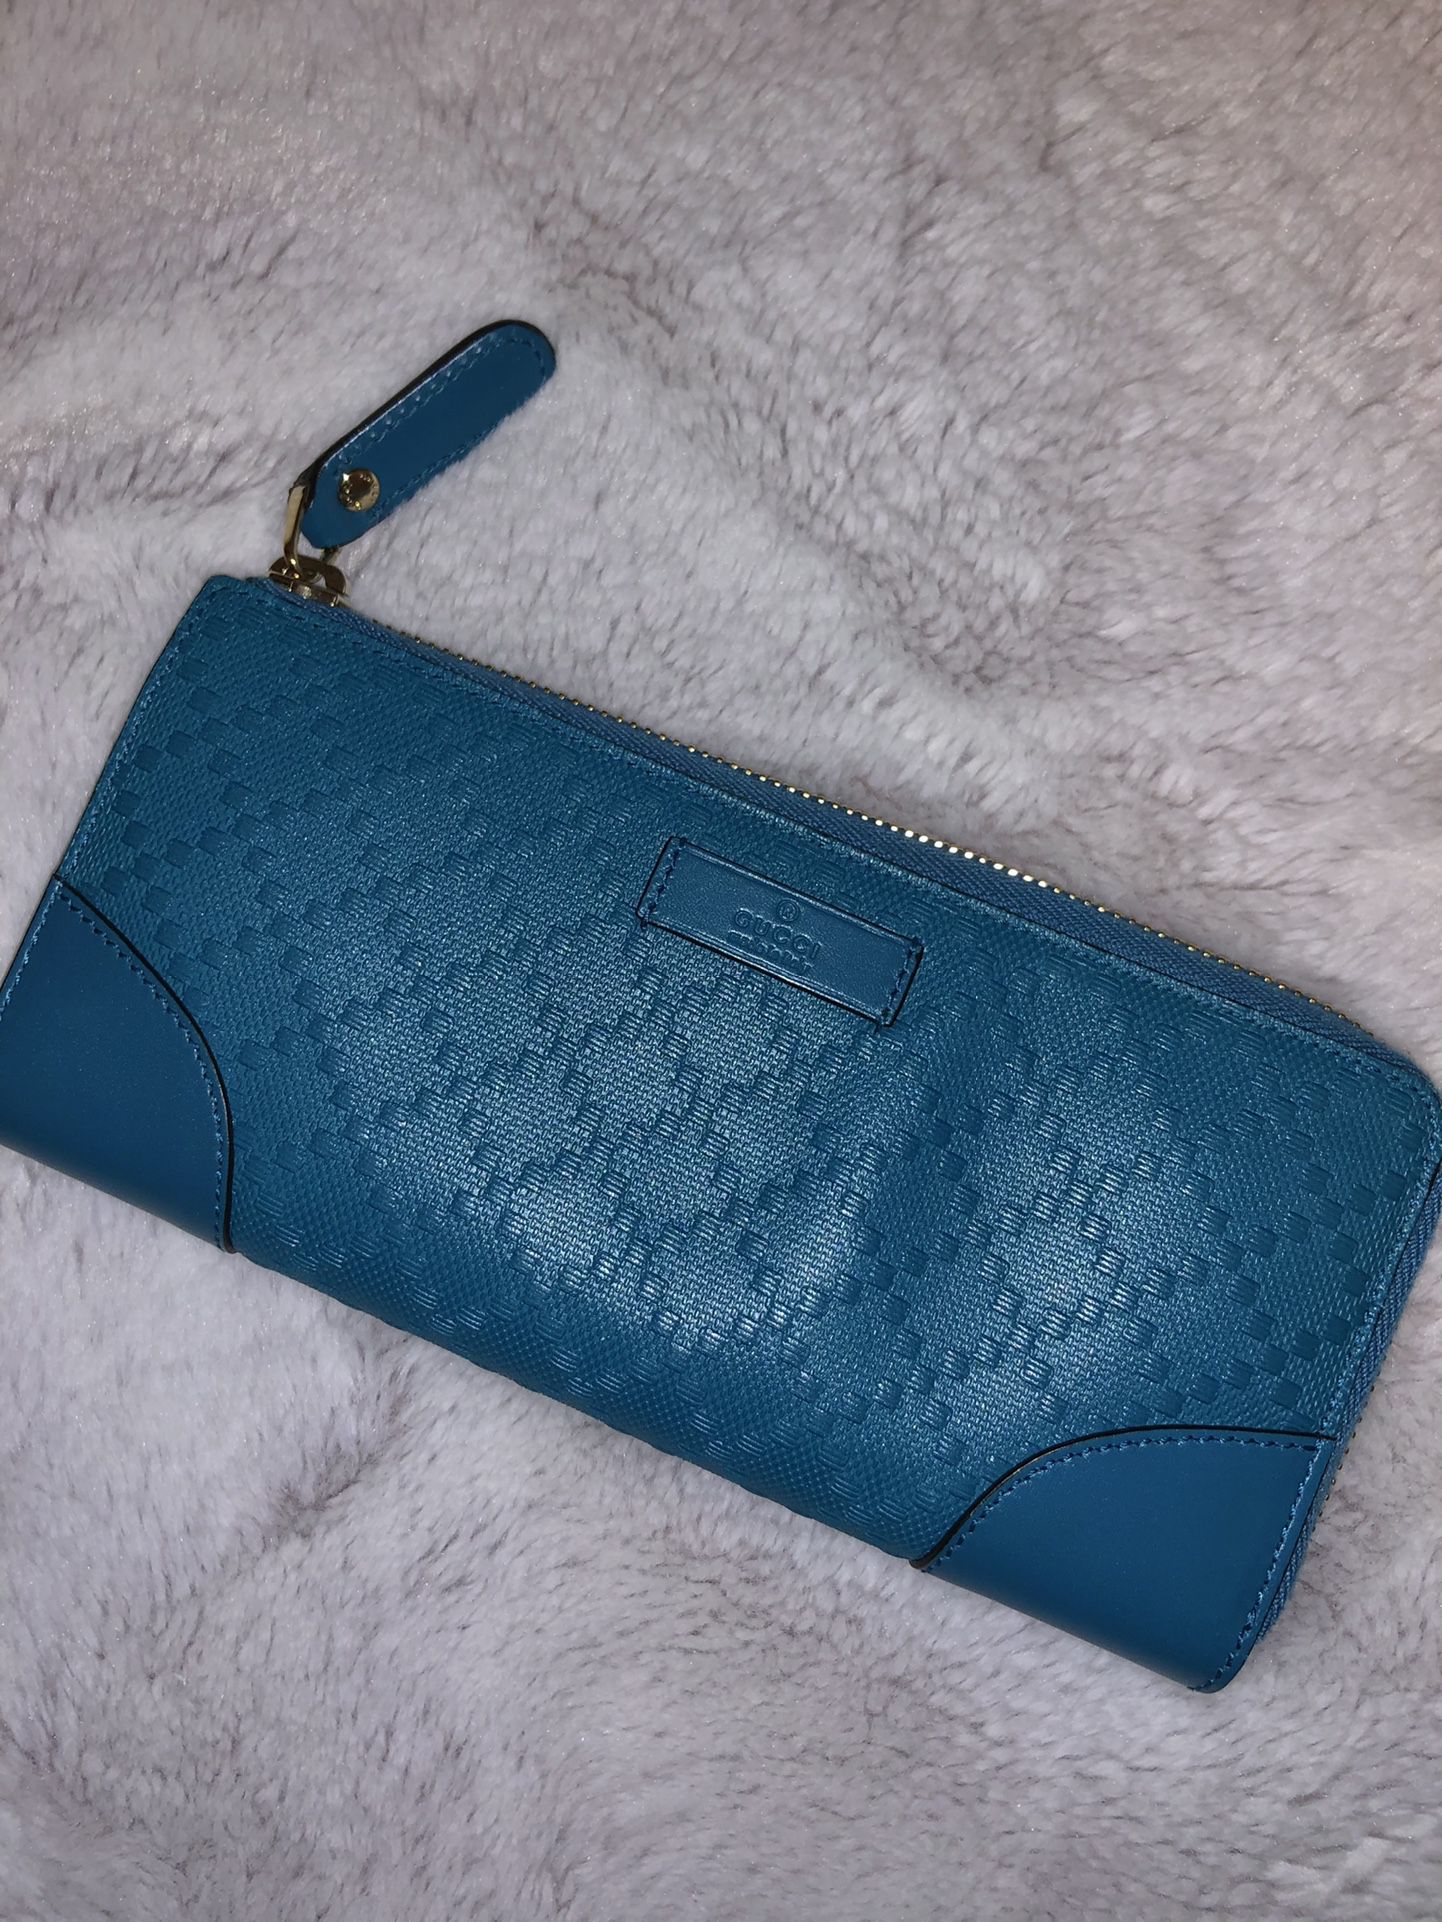 Turquoise Gucci Wallet 